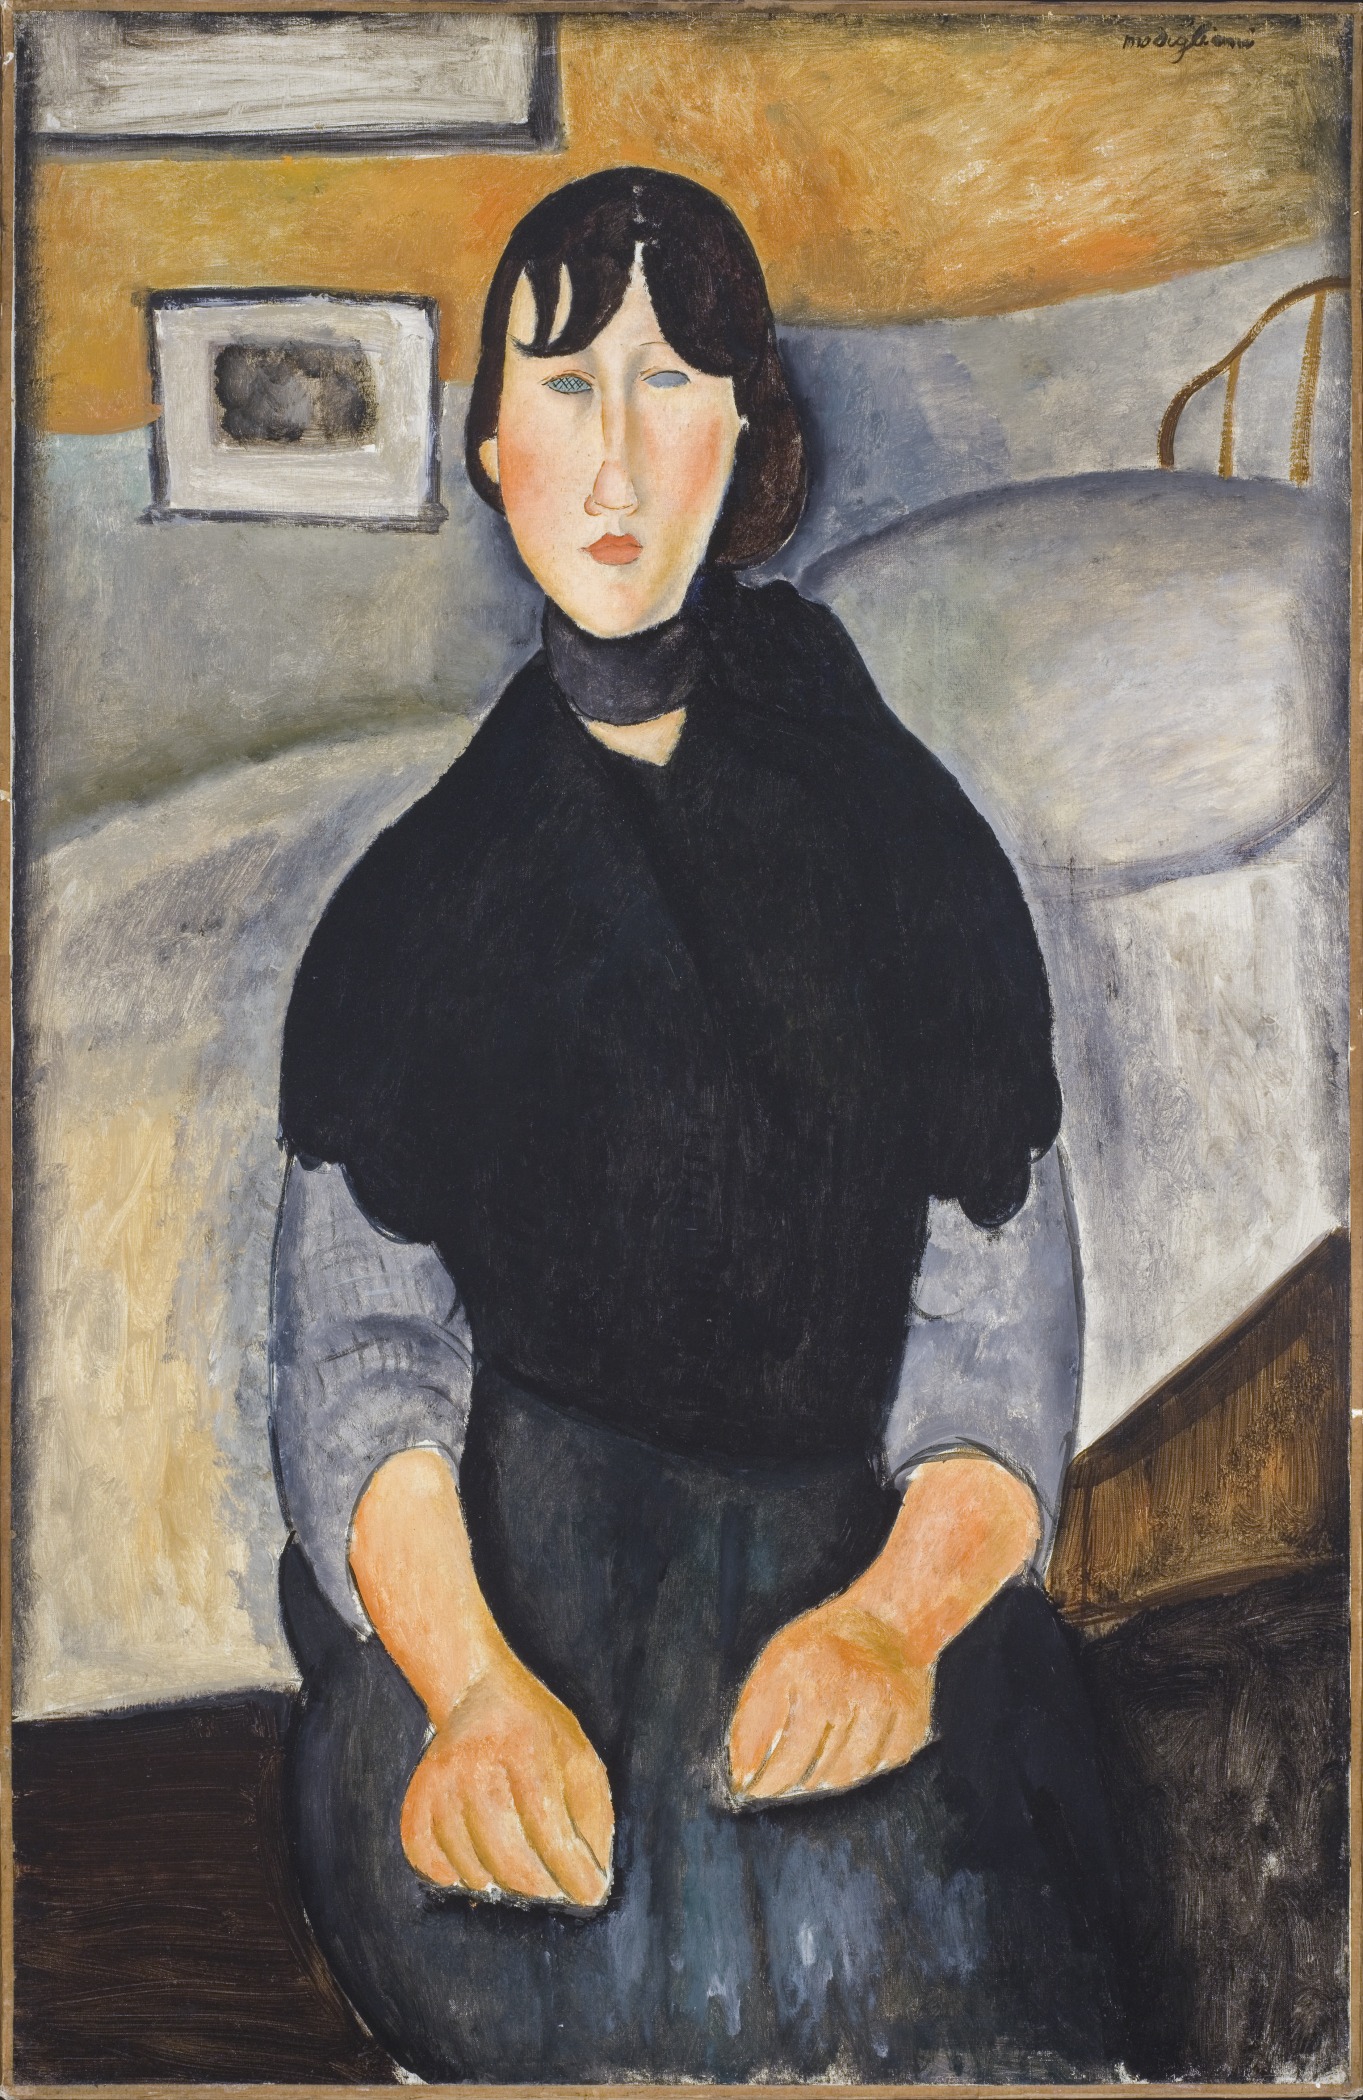 Young Woman of the People by Amedeo Modigliani - 1918 - 89.535 x 64.135 cm LACMA, Los Angeles County Museum of Art